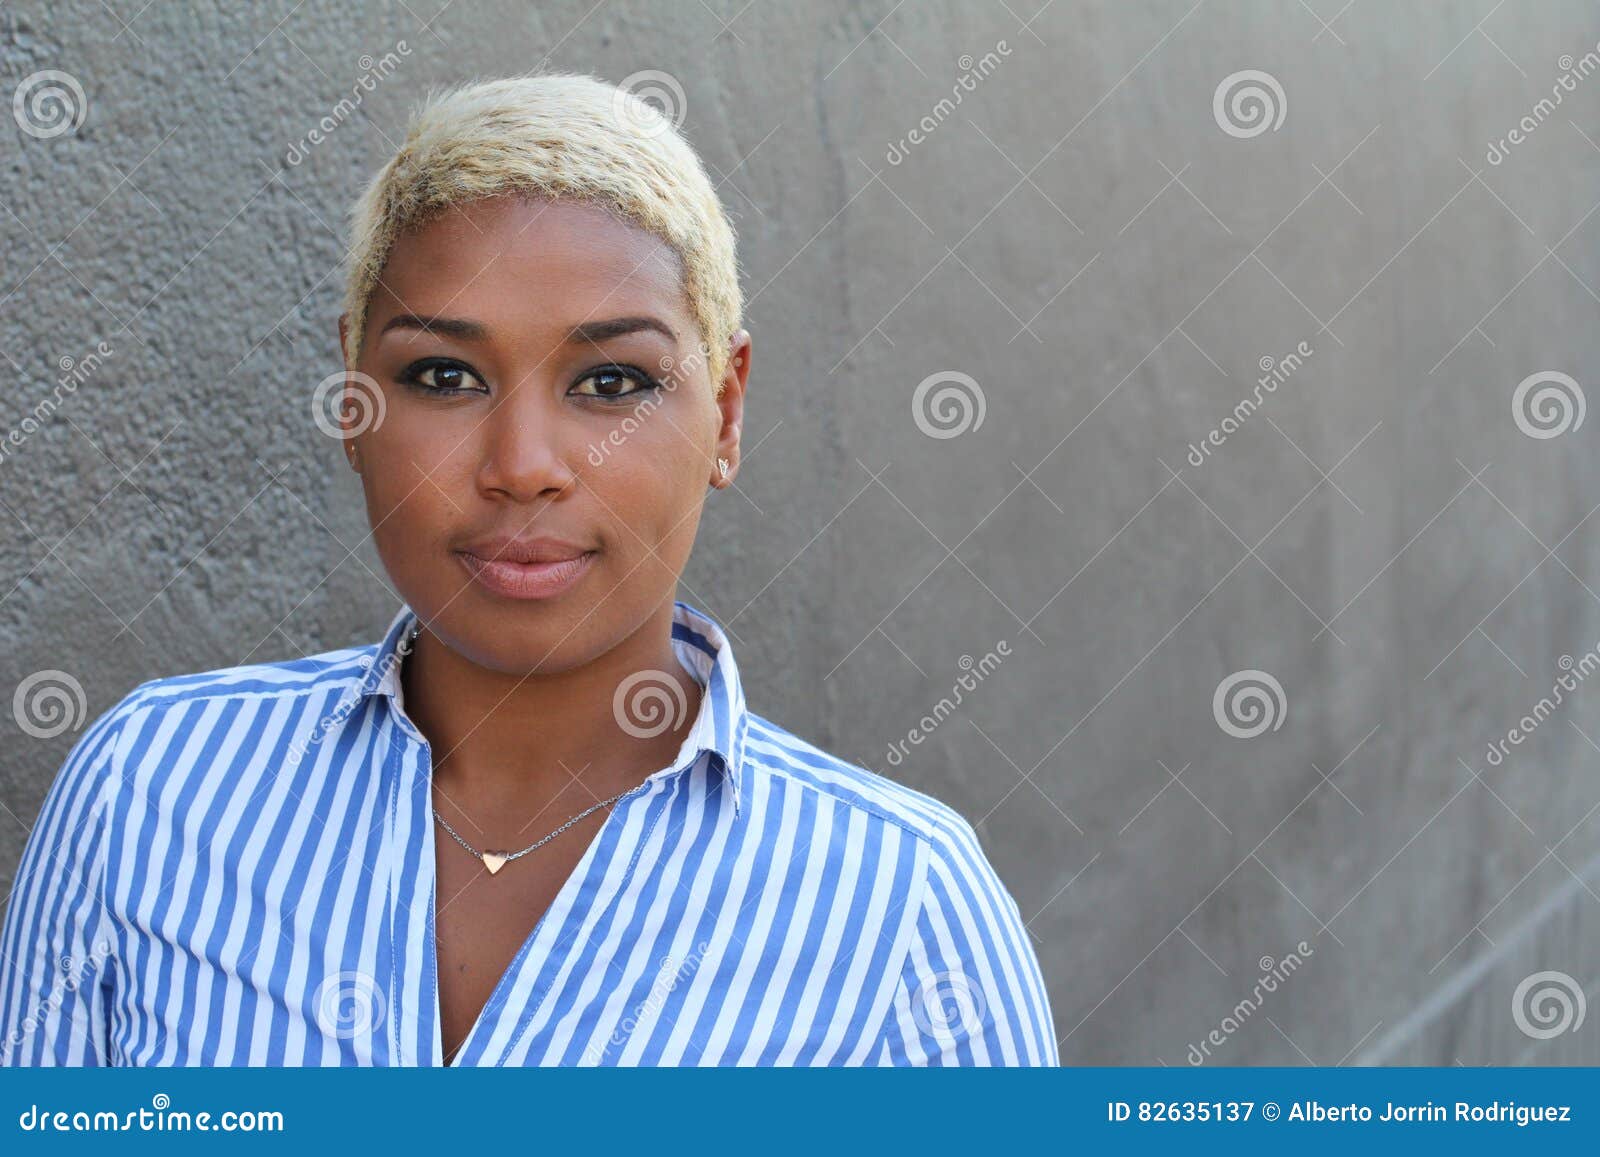 beautiful-young-african-american-woman-short-dyed-blond-hair-looking-camera-relaxed-neutral-expression-82635137.jpg